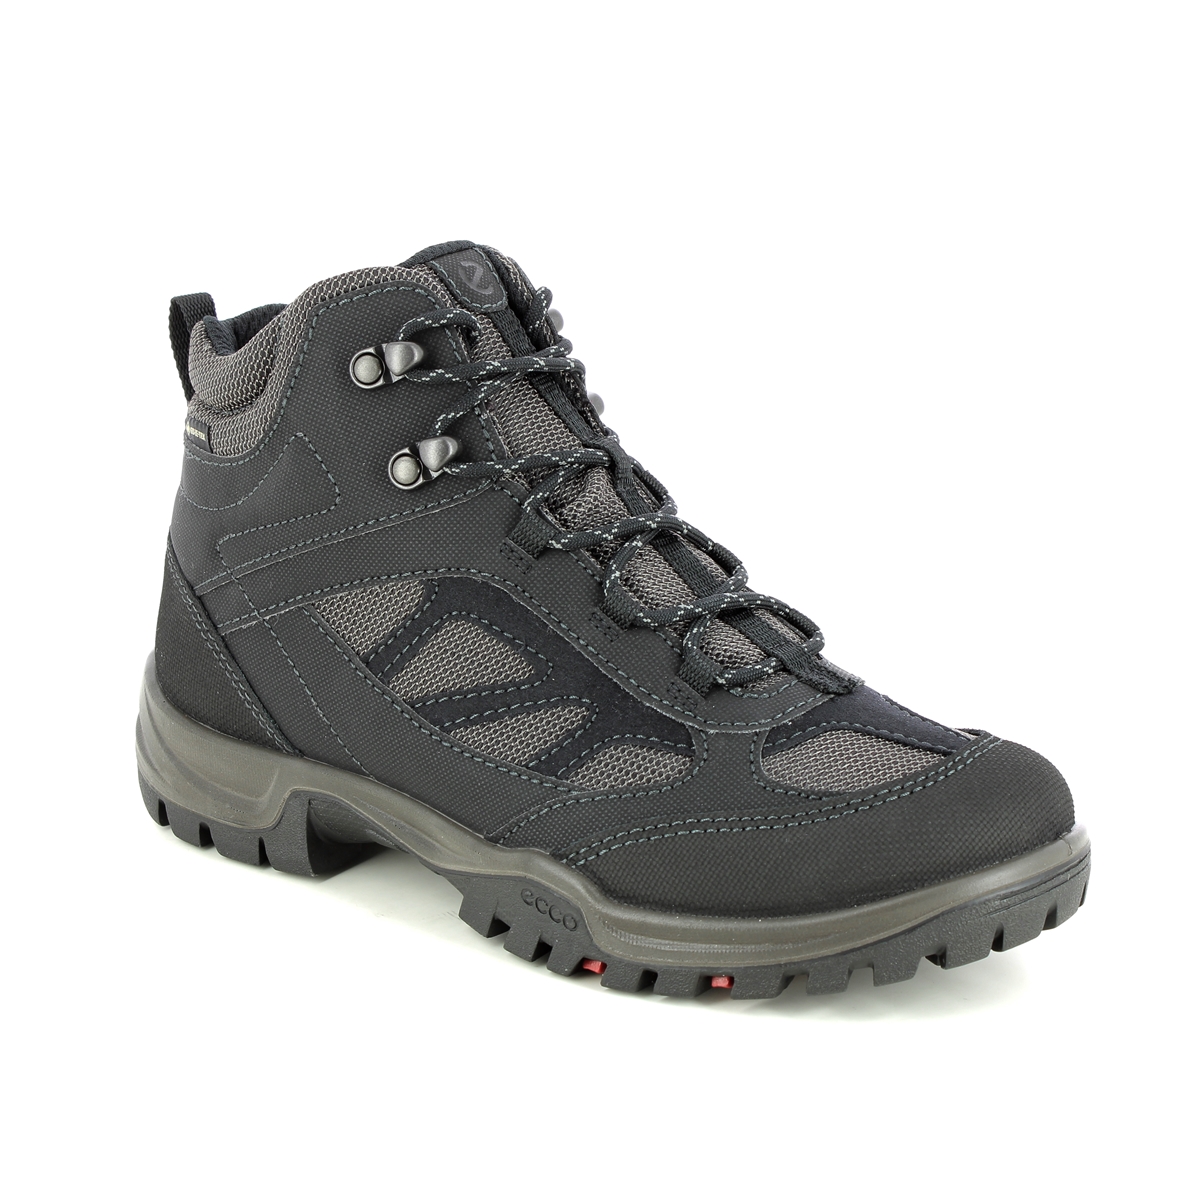 Ecco Xpedition W Mid Gtx Black Womens Walking Boots 811273-51526 In Size 42 In Plain Black